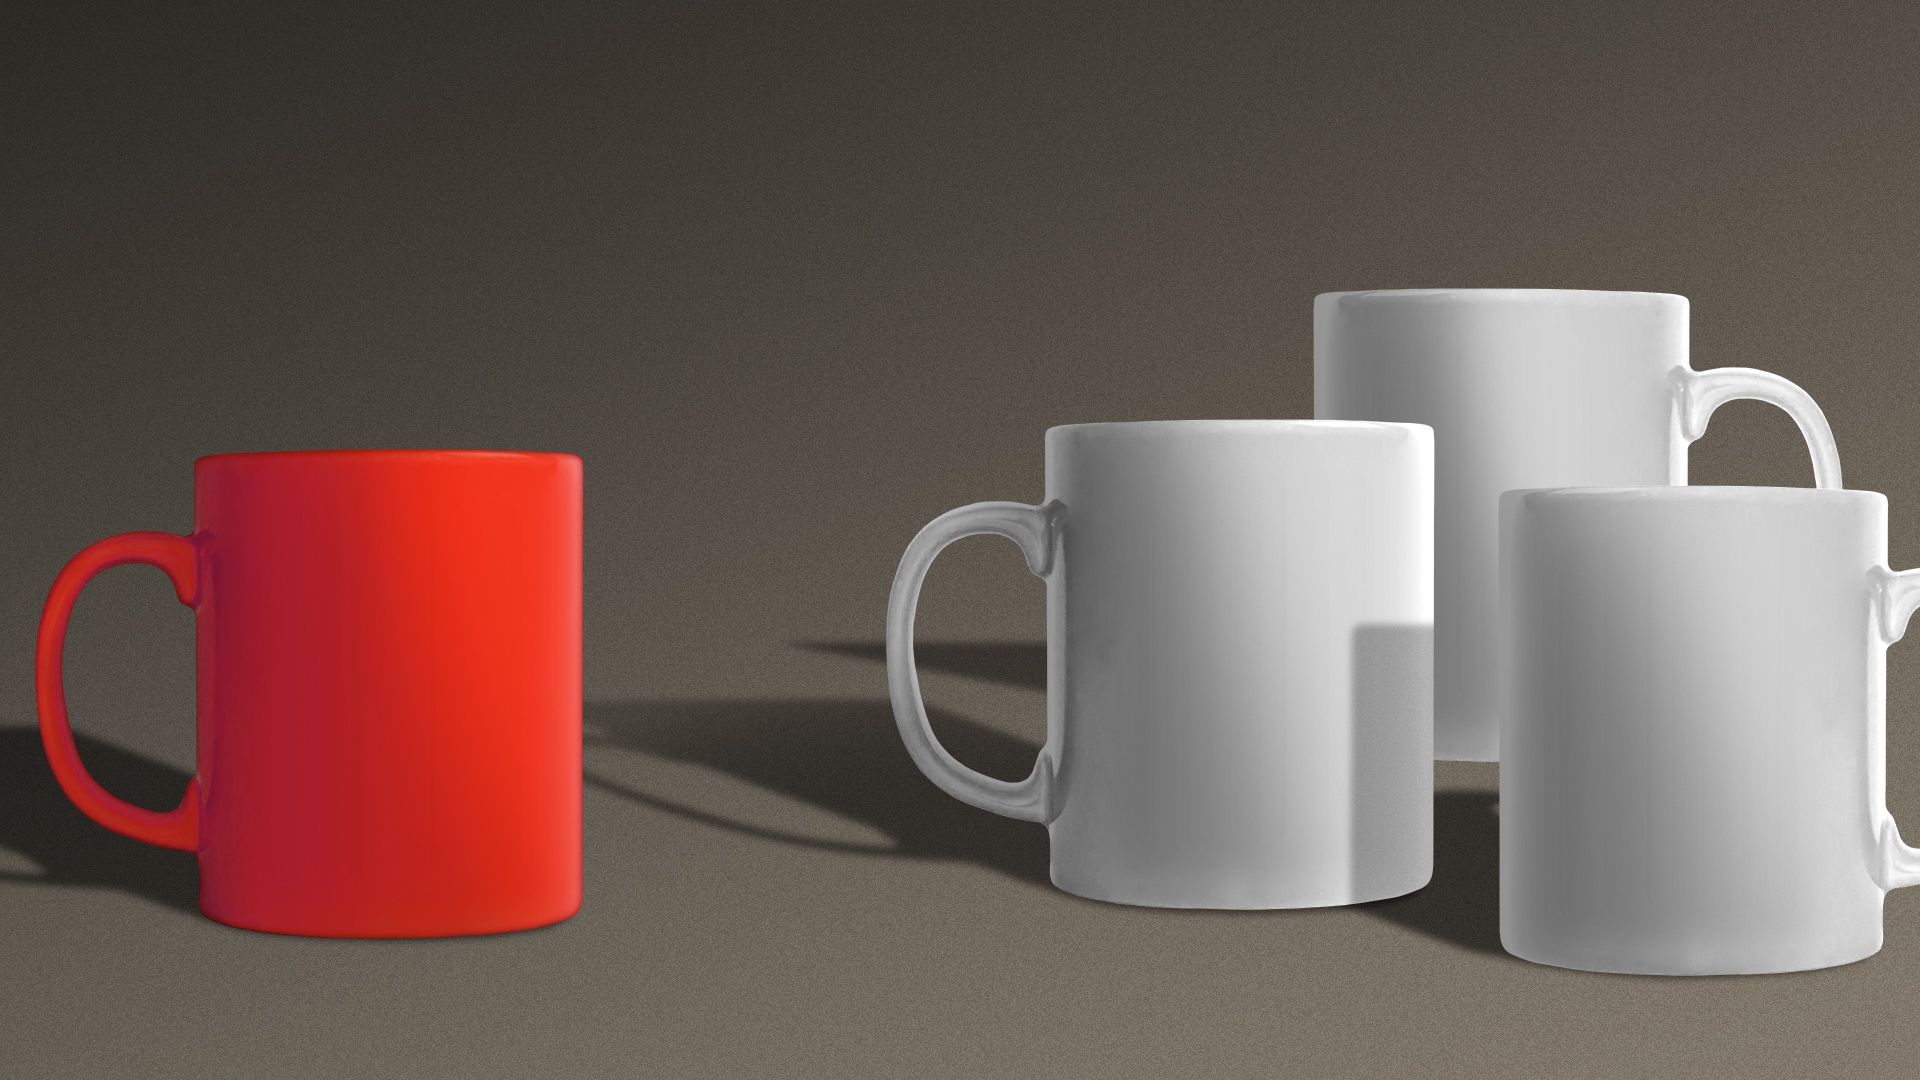 Illustration of a red mug separated from a group of white mugs.